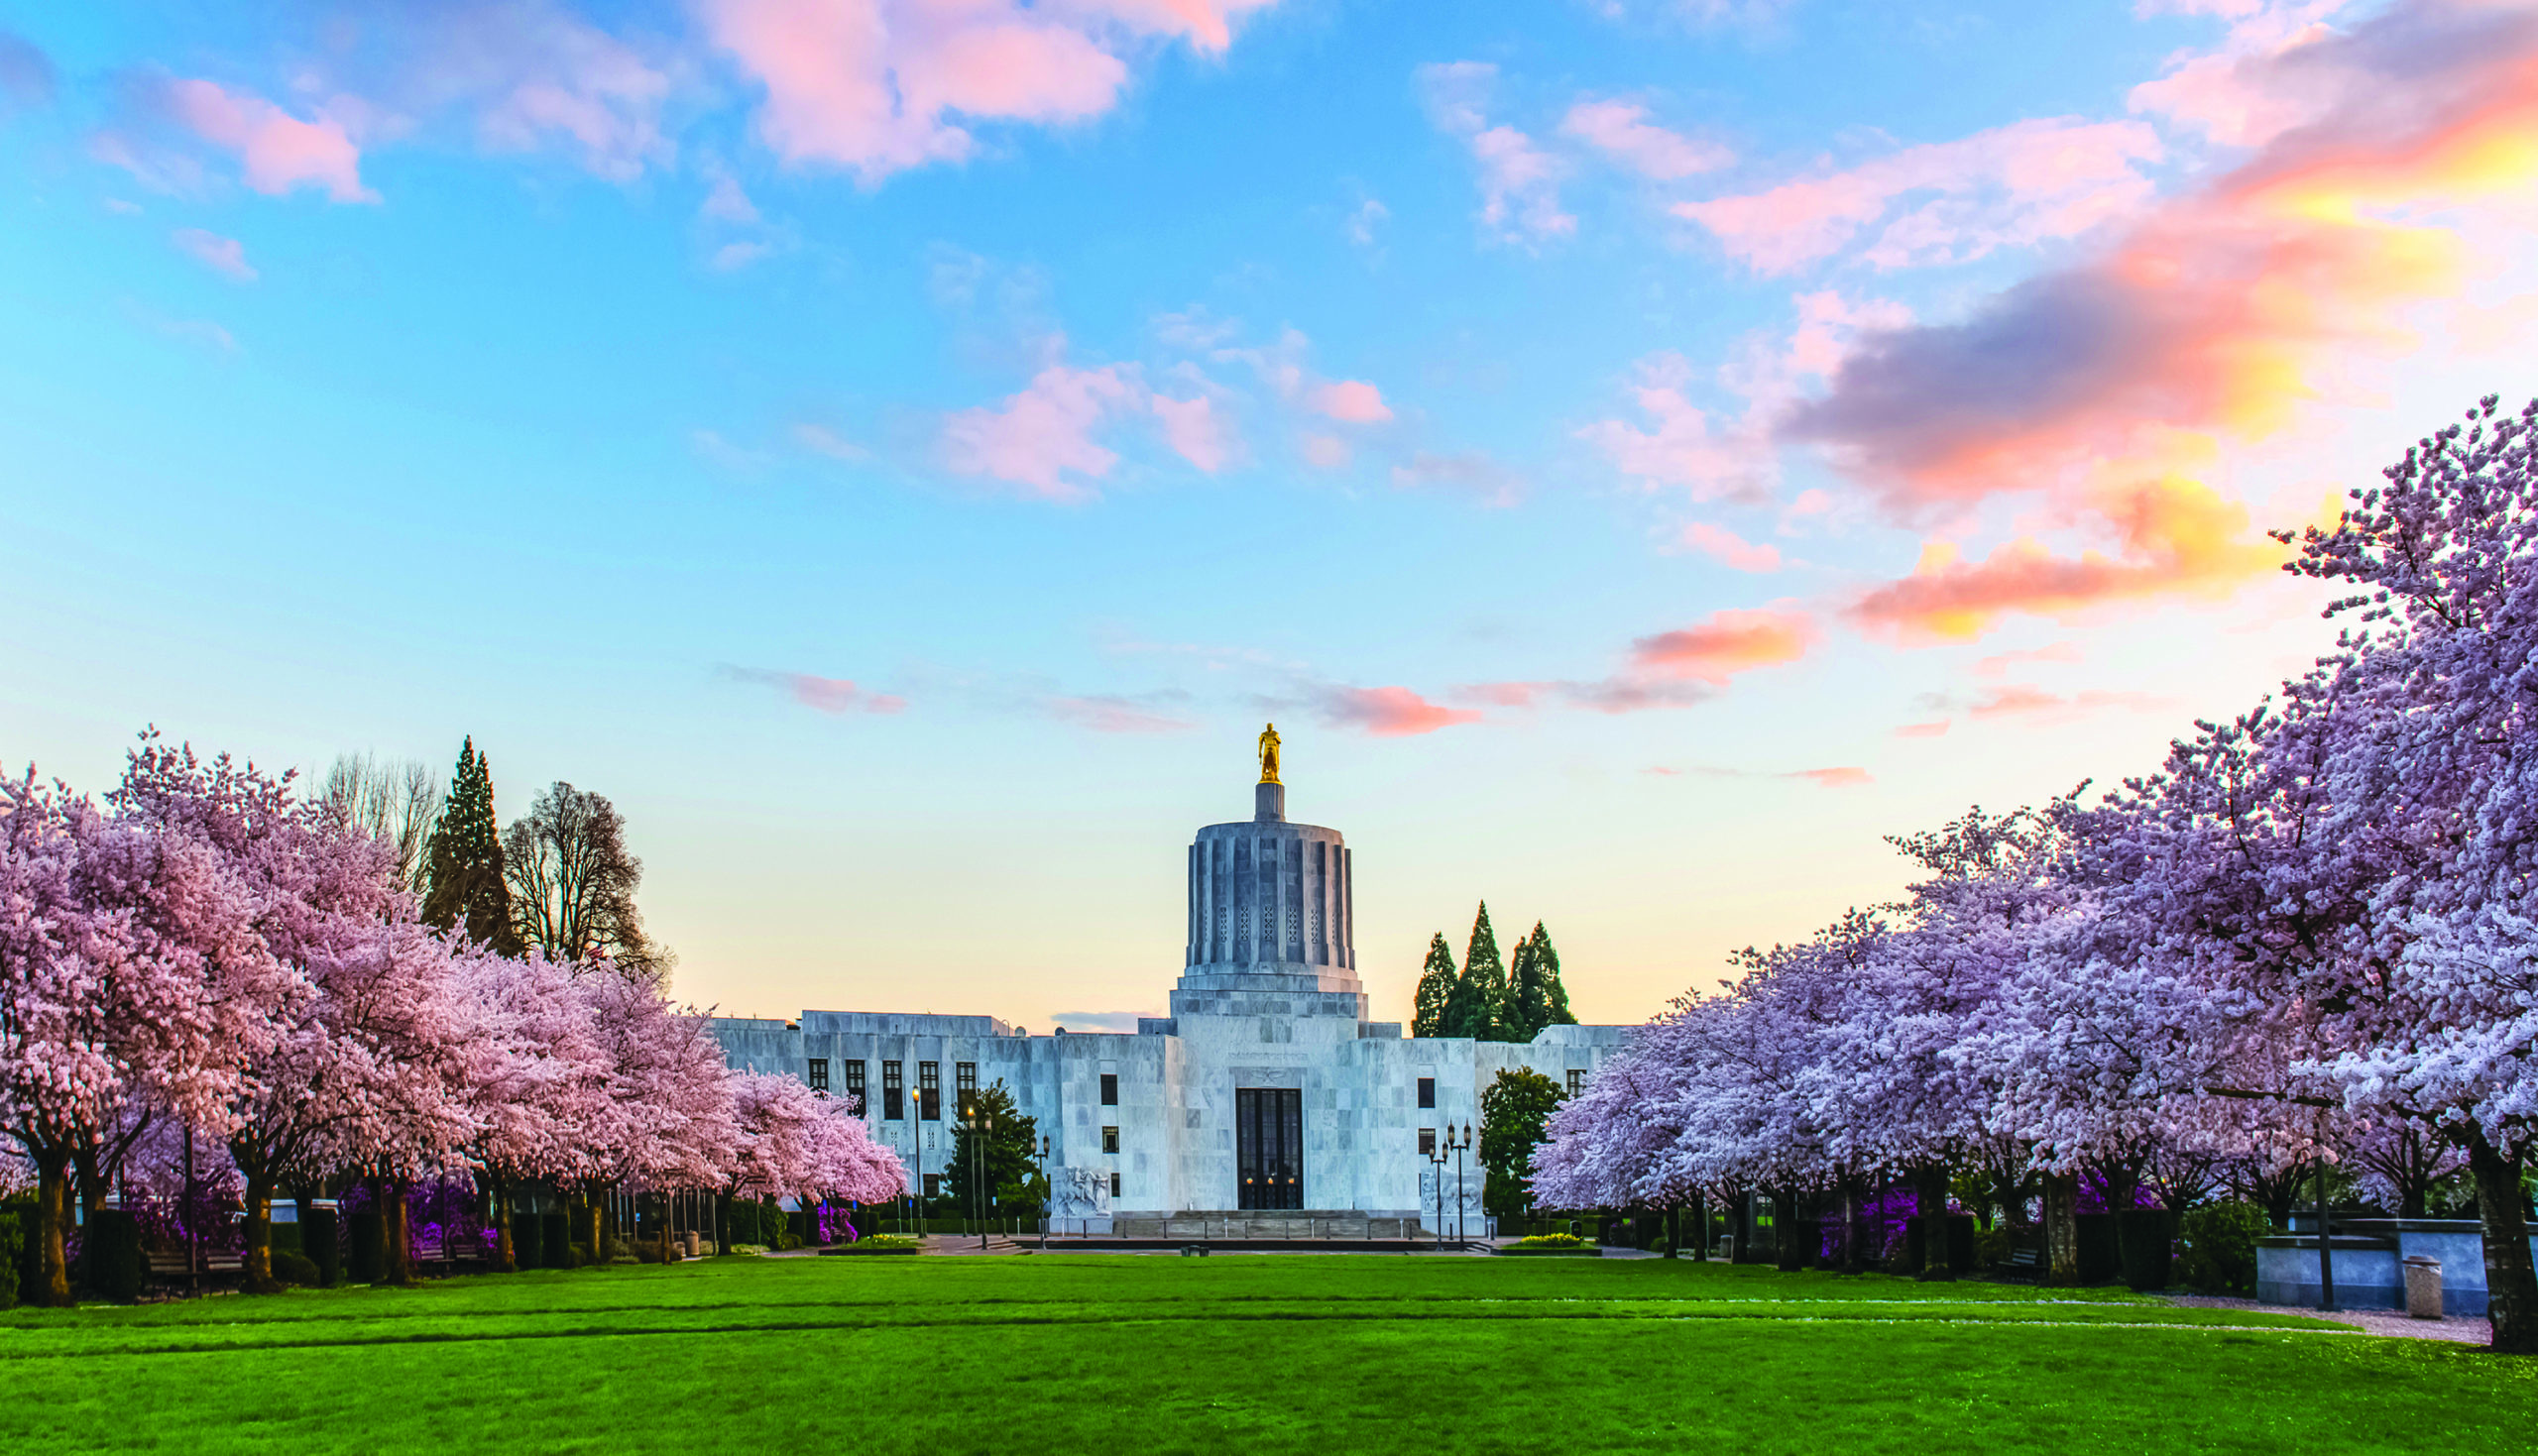 Capitol building in Salem, Oregon with two rows of cherry trees in the foreground